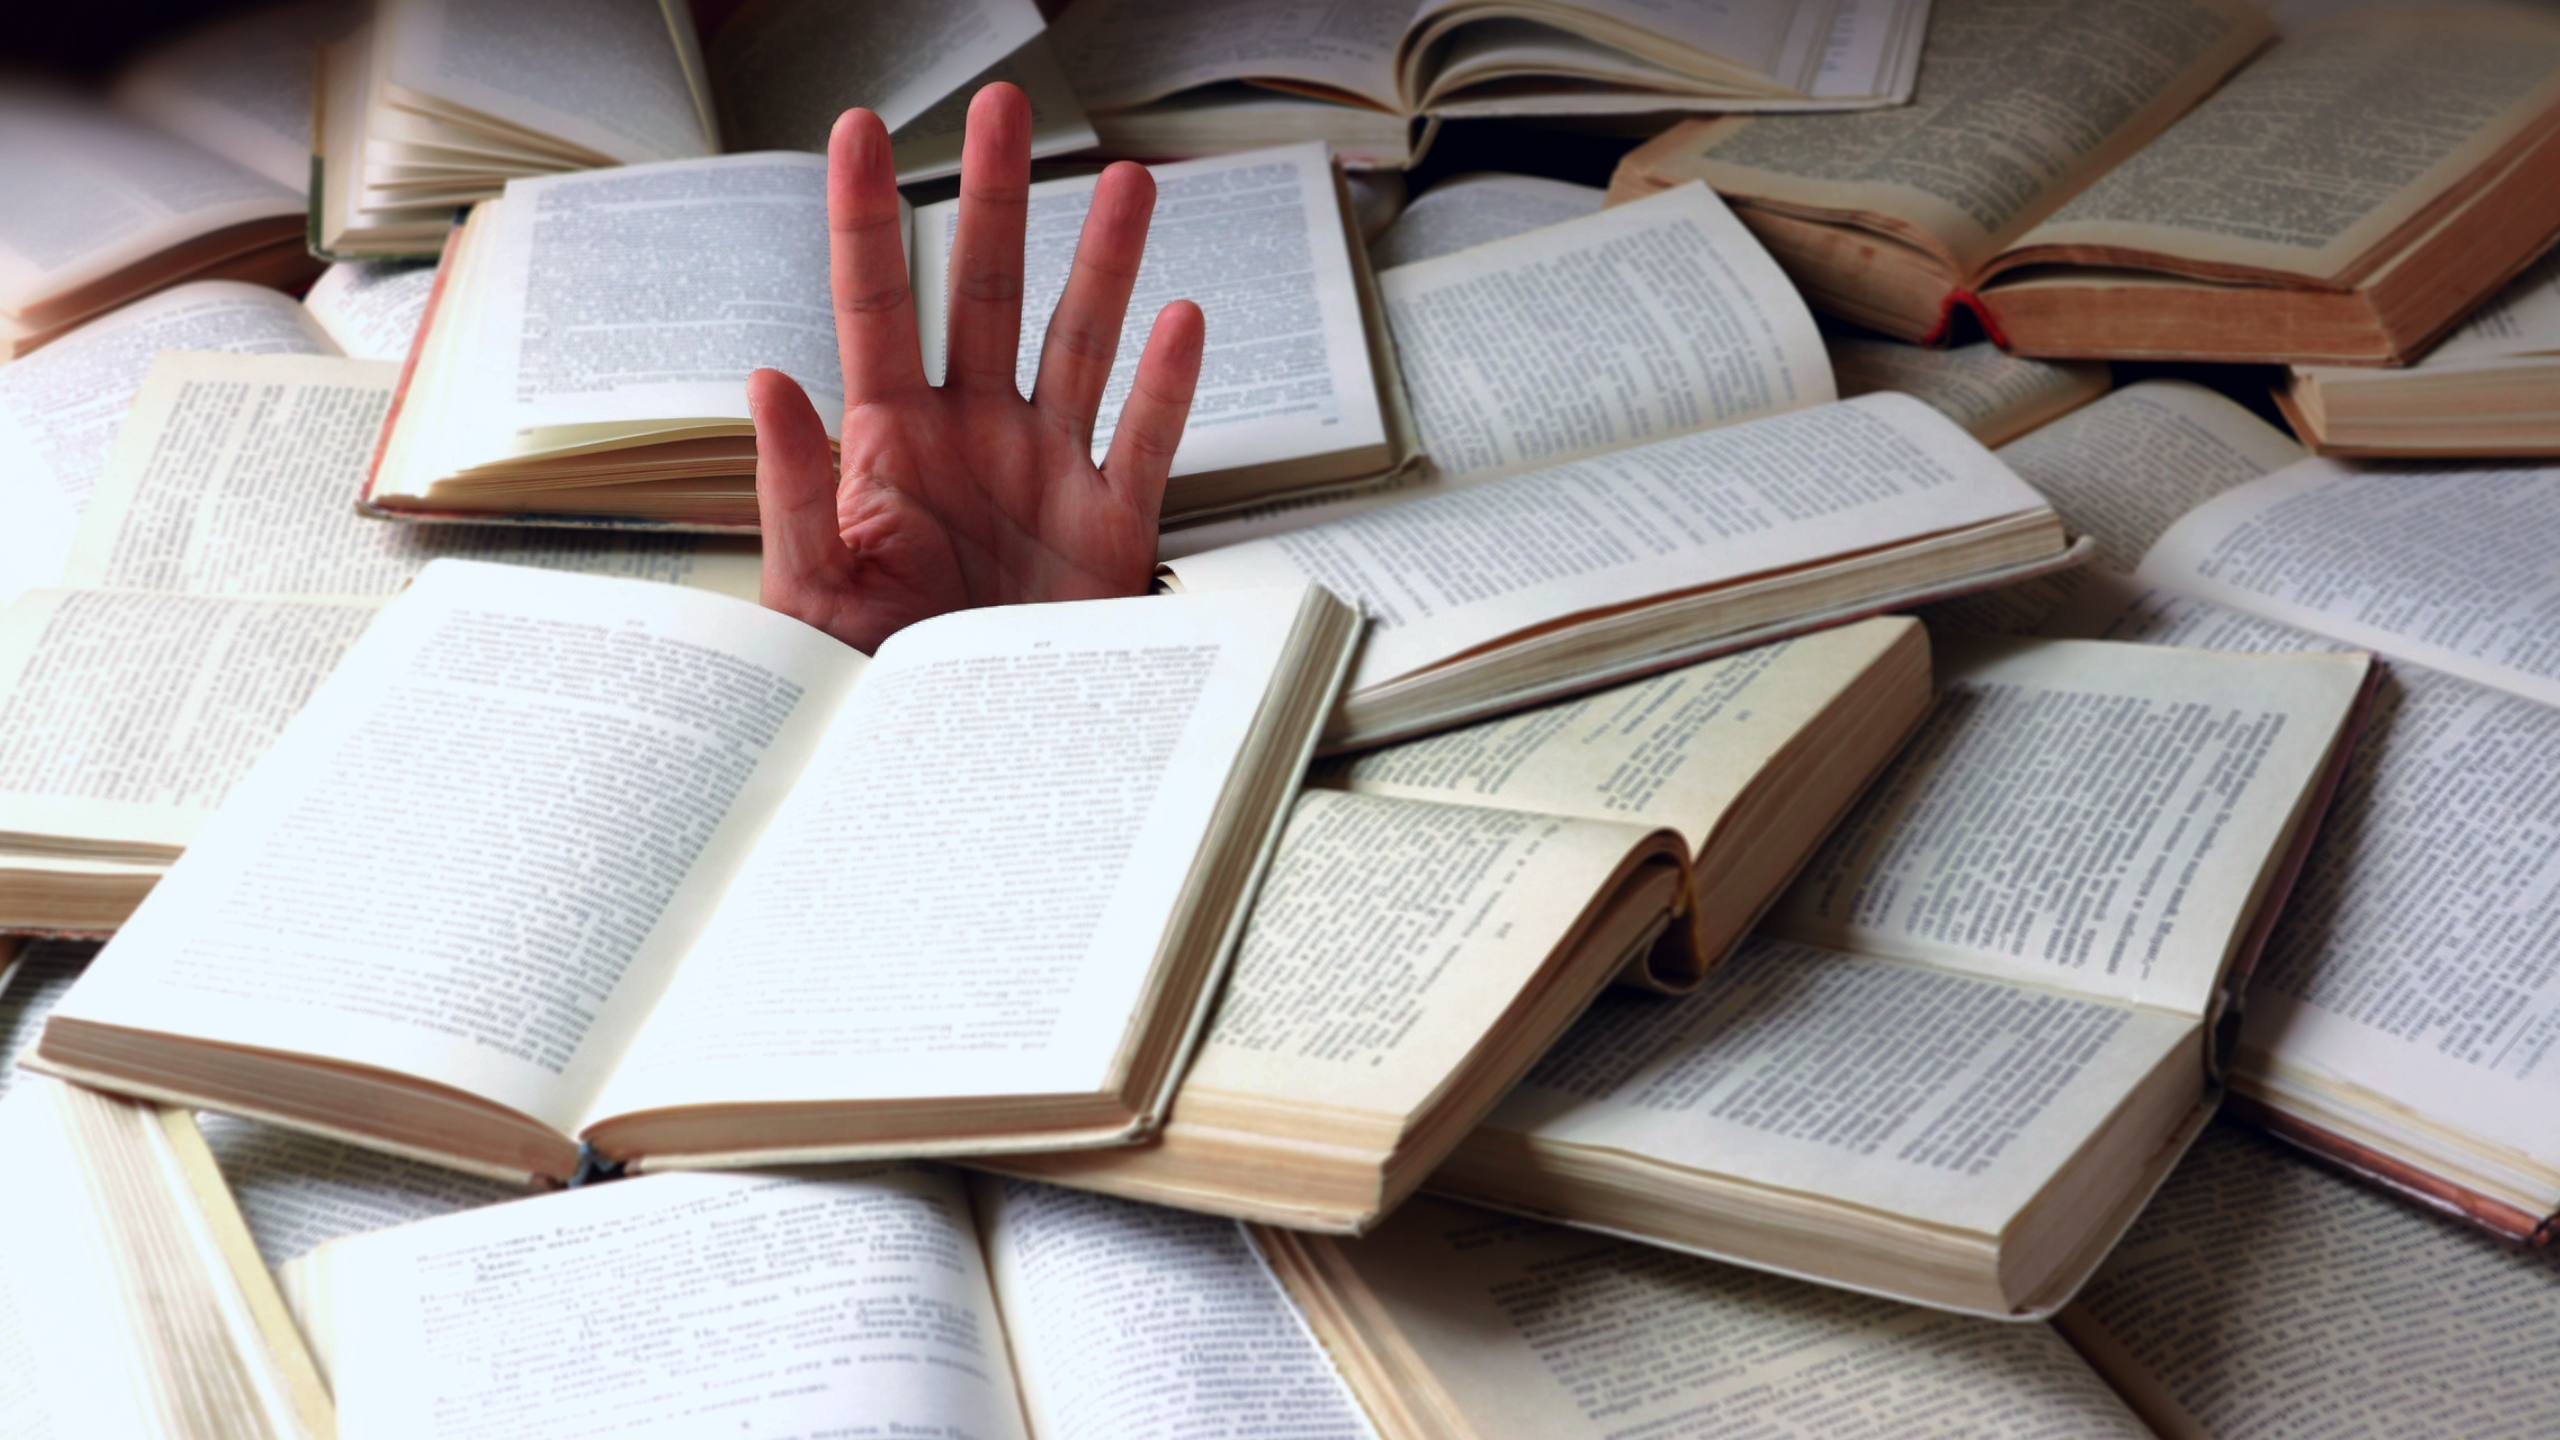 A hand emerges from under a pile of open books